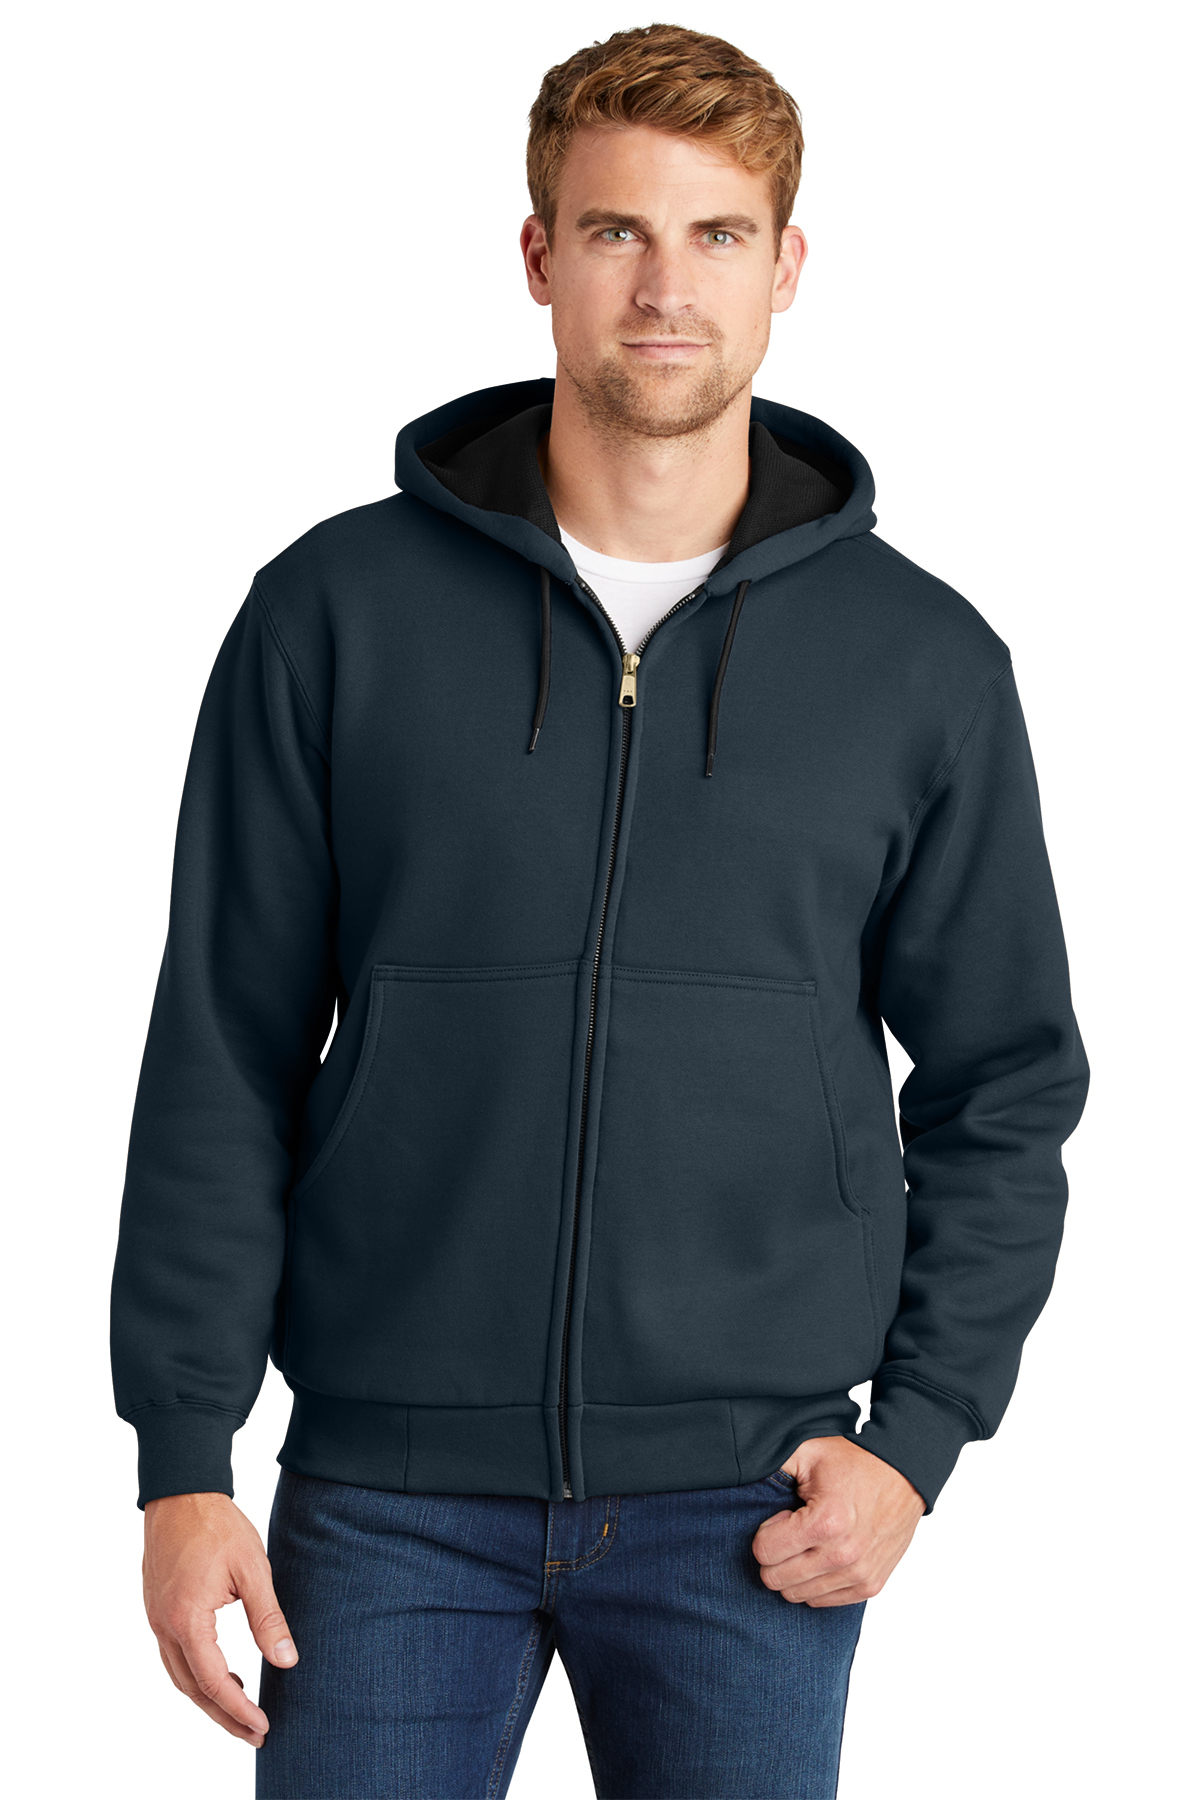 Heavyweight Full-Zip Hooded Sweatshirt with Thermal Lining, Product